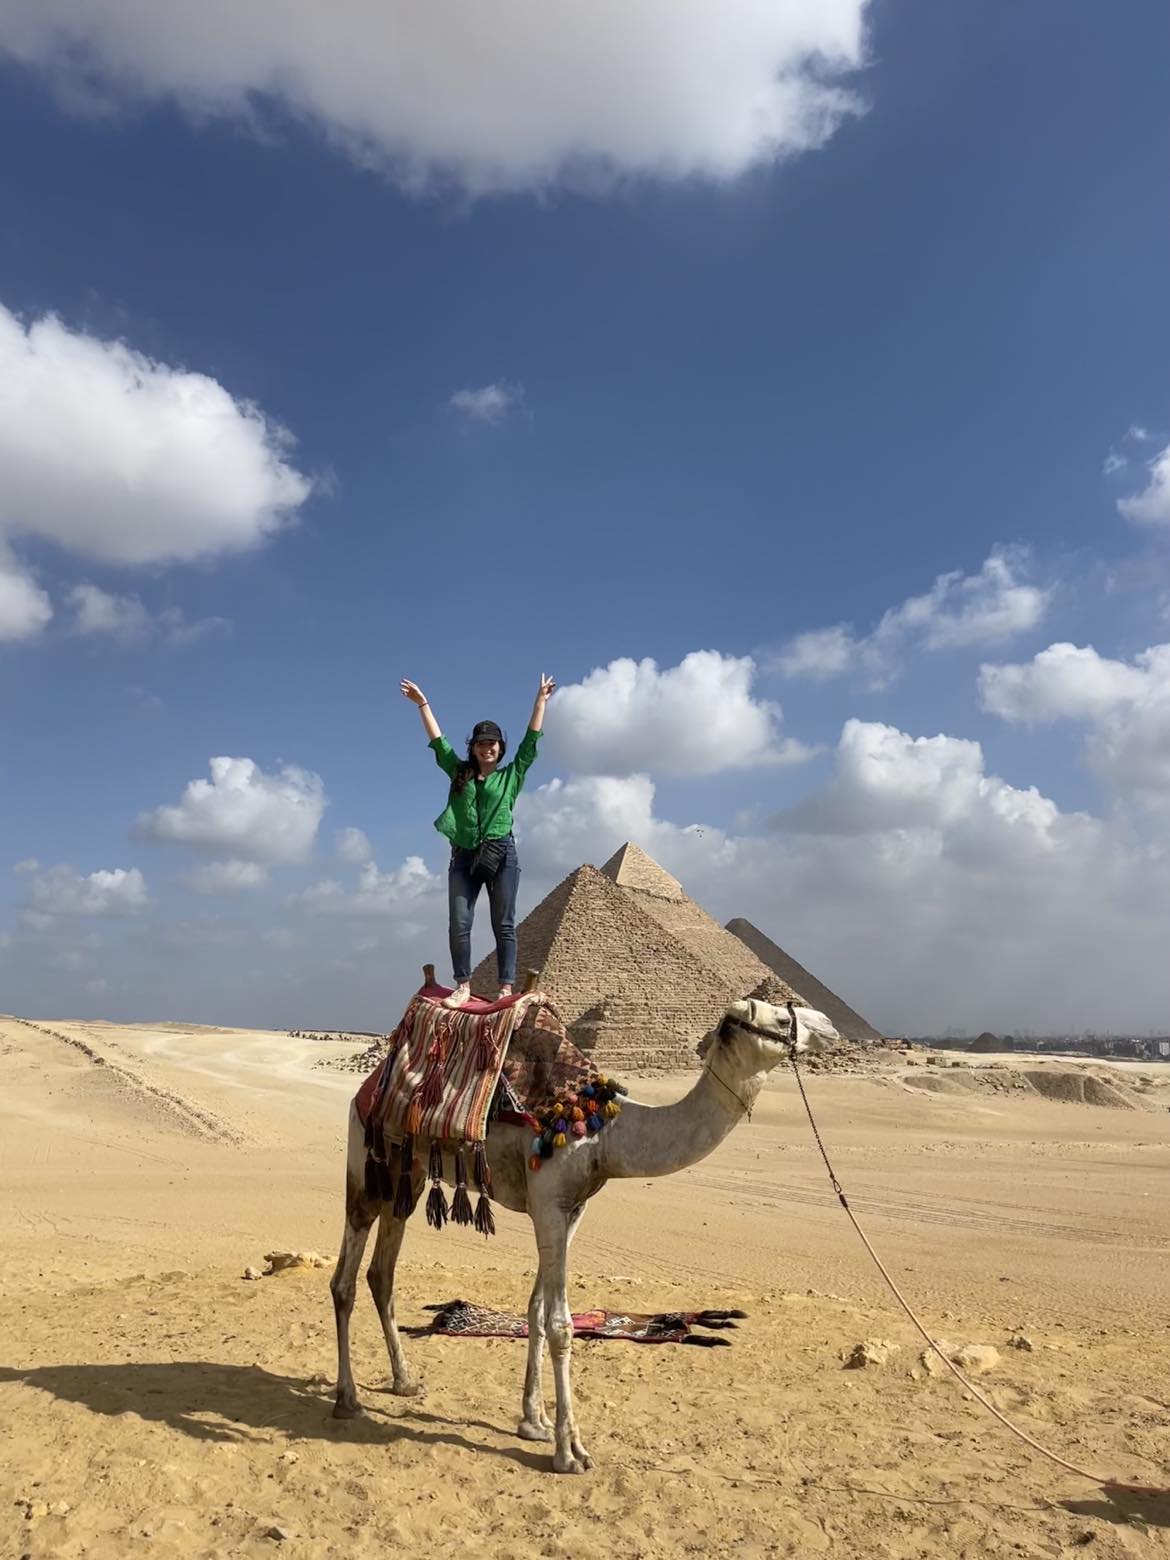 Serena Tohmé, a woman, riding a camel in front of the pyramids.